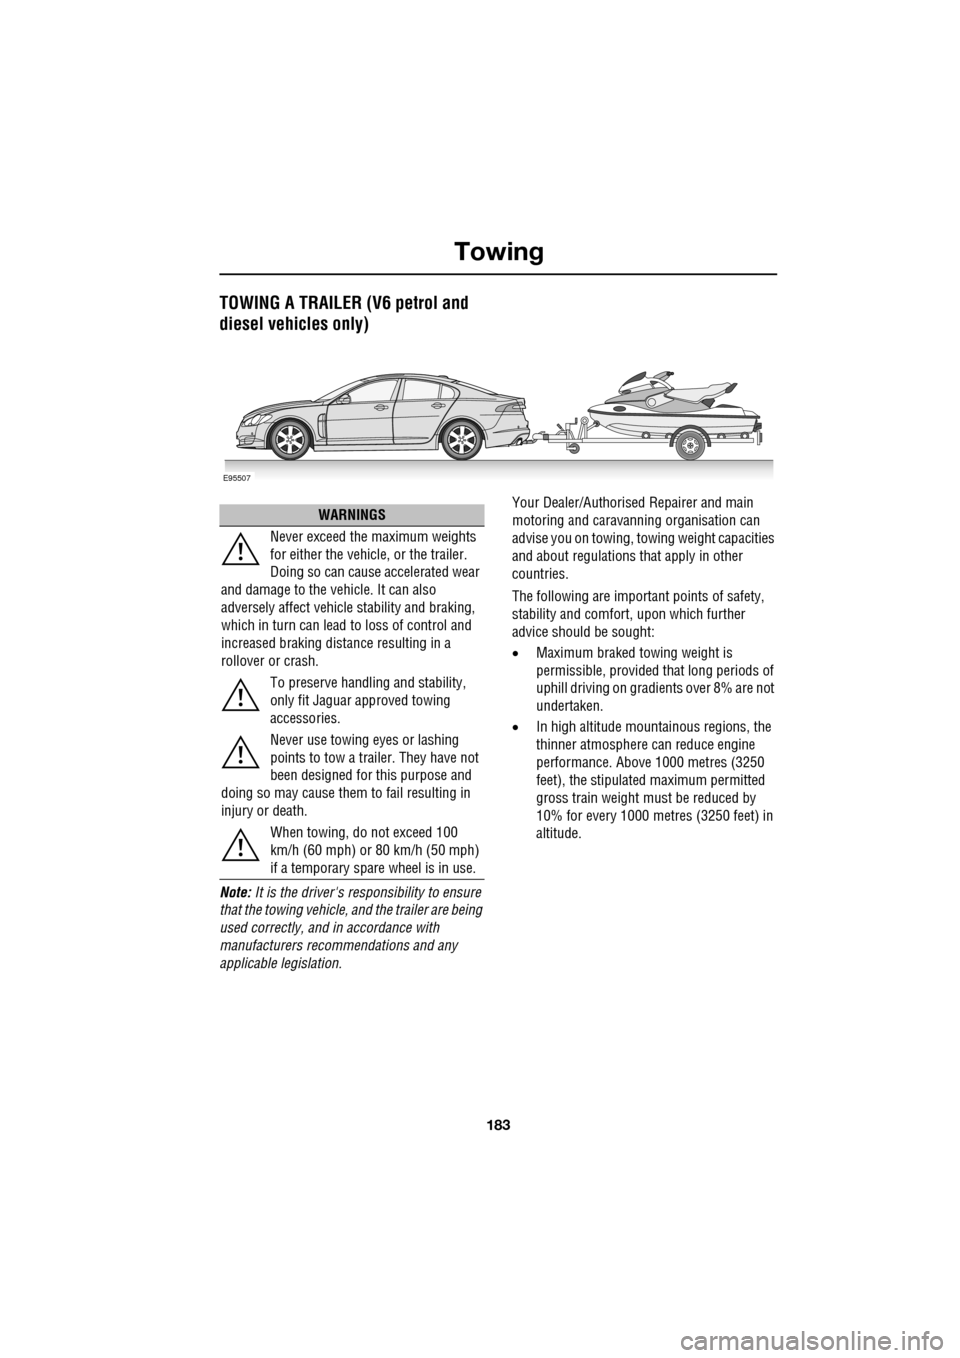 JAGUAR XF 2009 1.G Owners Manual 183
Towing
               
TOWING A TRAILER (V6 petrol and 
diesel vehicles only)
Note: It is the drivers responsibility to ensure 
that the towing vehicle,  and the trailer are being 
used correctly